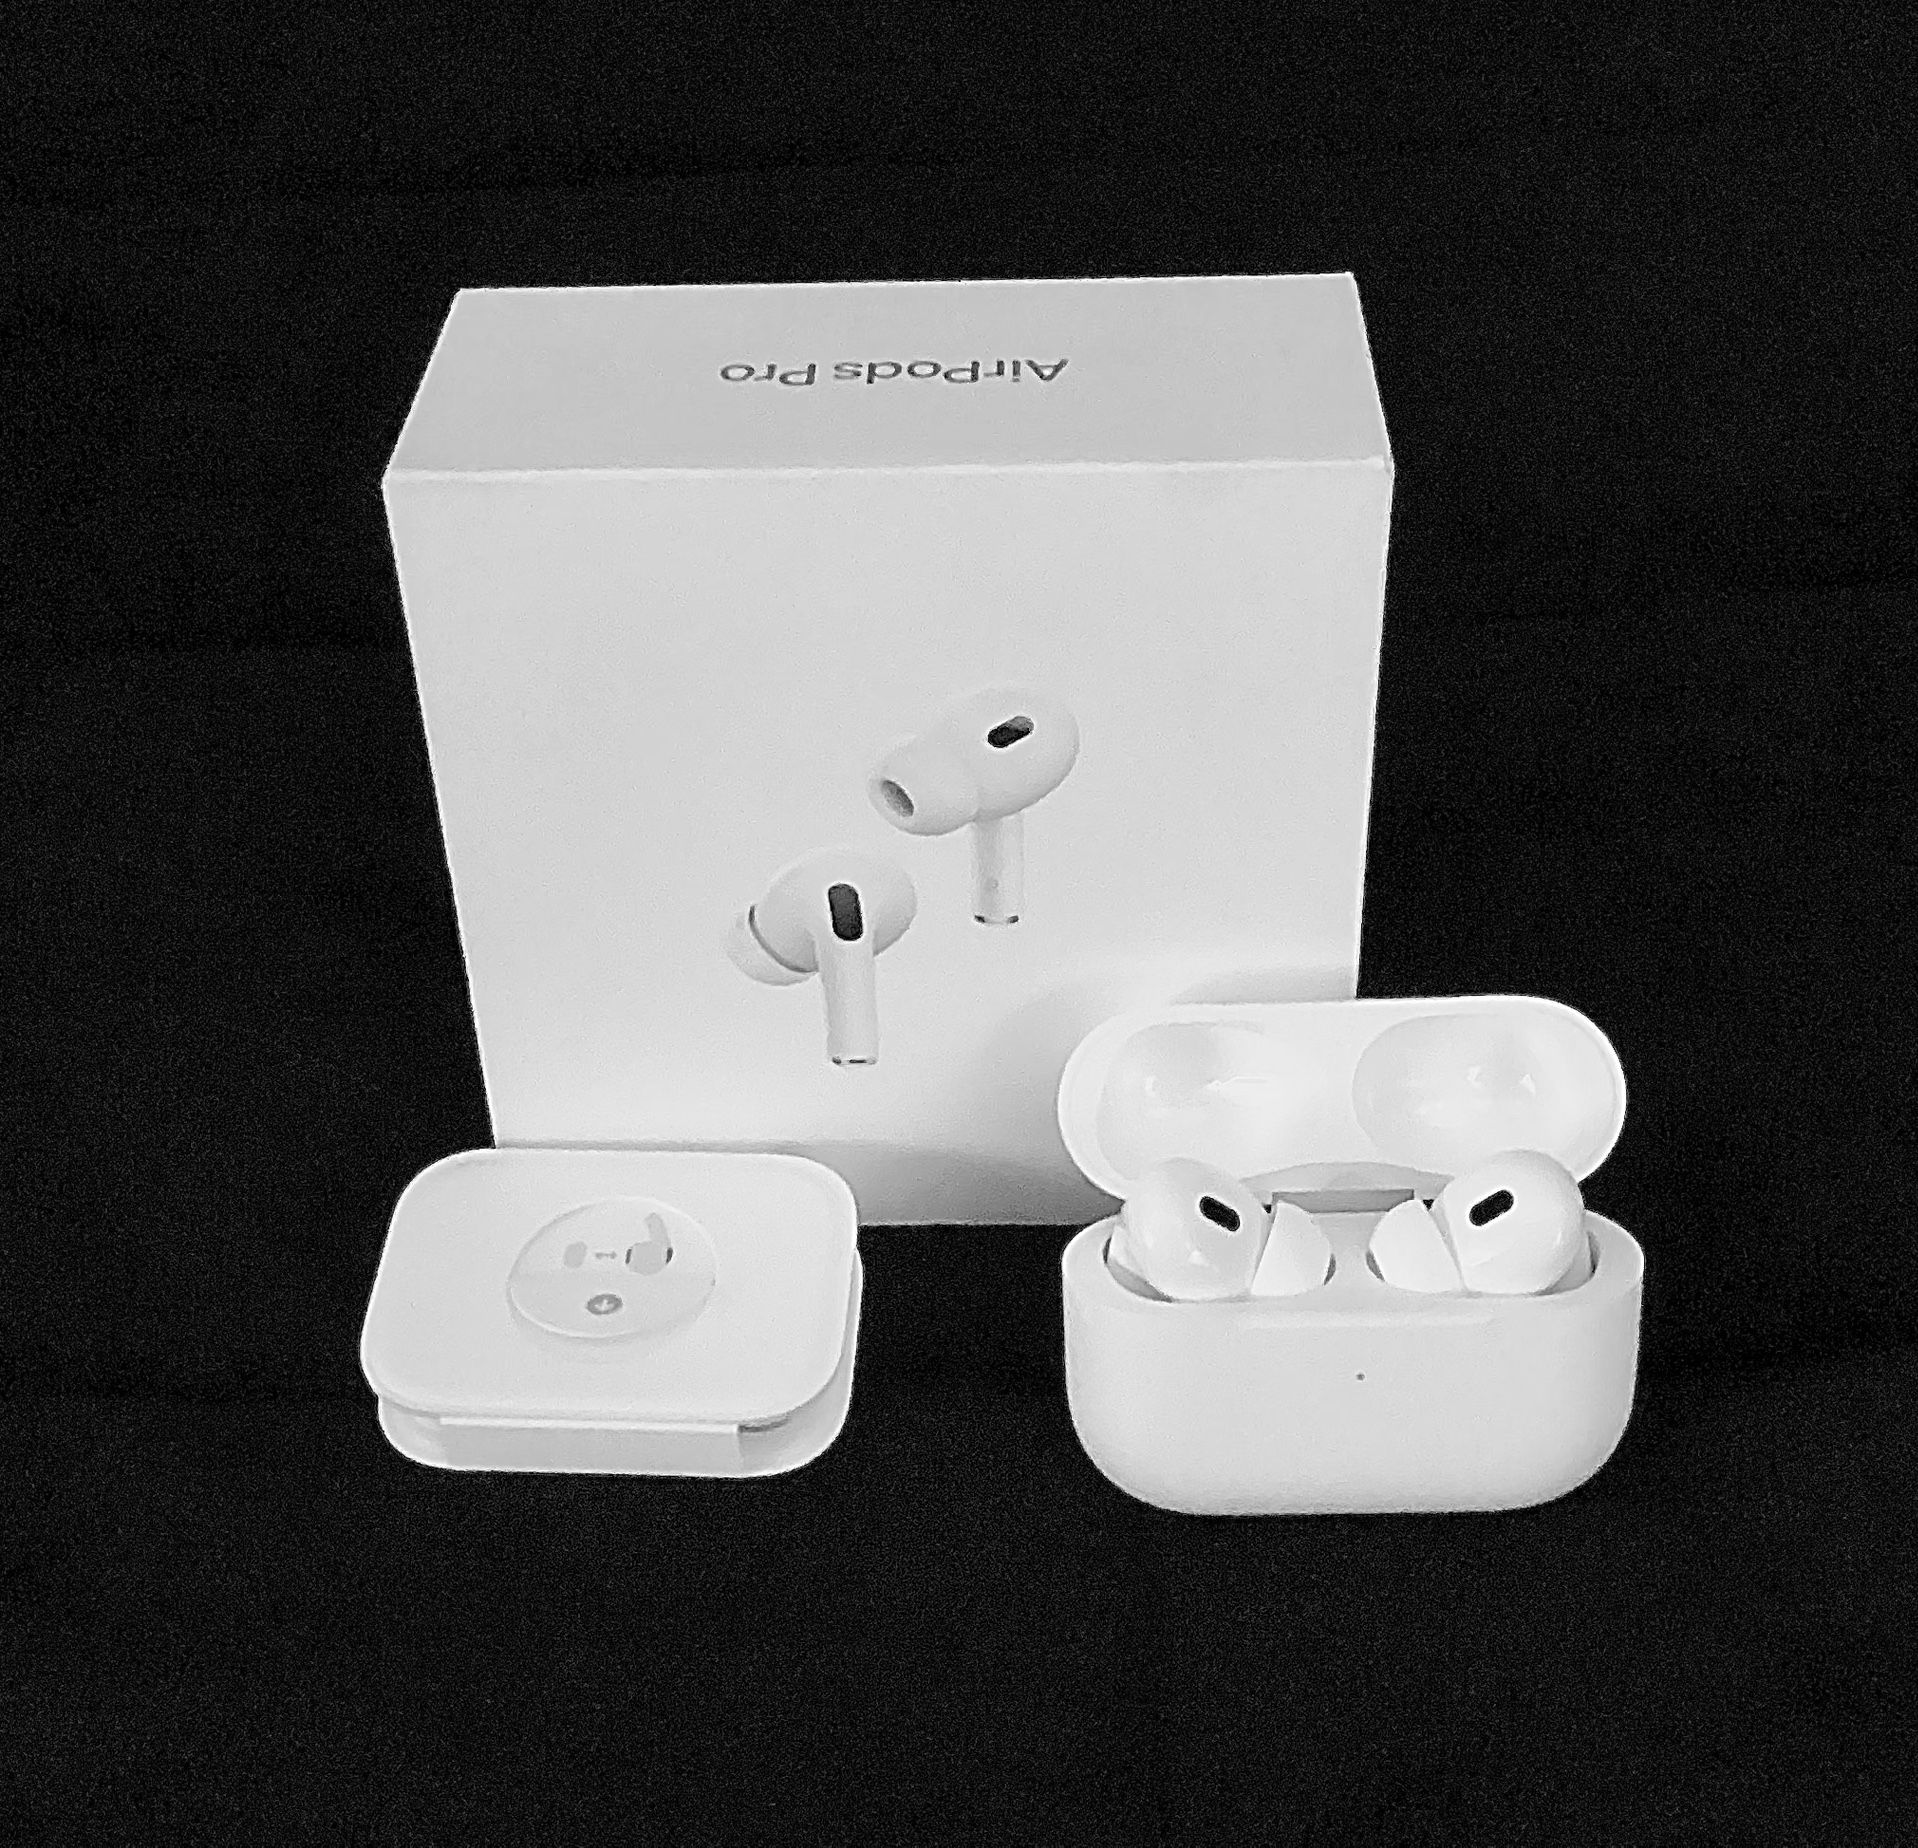 Apple AirPods Pro (2nd Generation) Wireless Ear Buds with USB-C Charging 